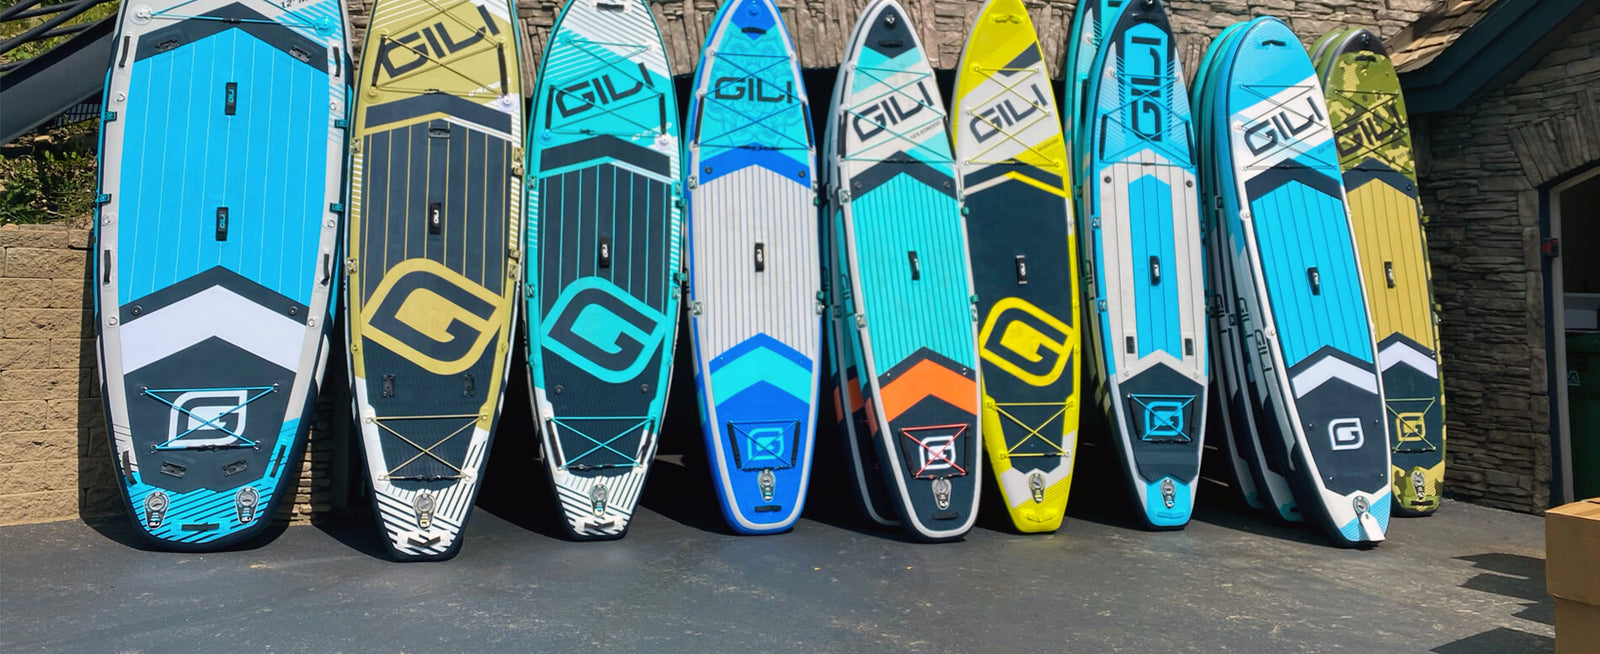 The Complete Guide to Buying a Used SUP | GILI Sports